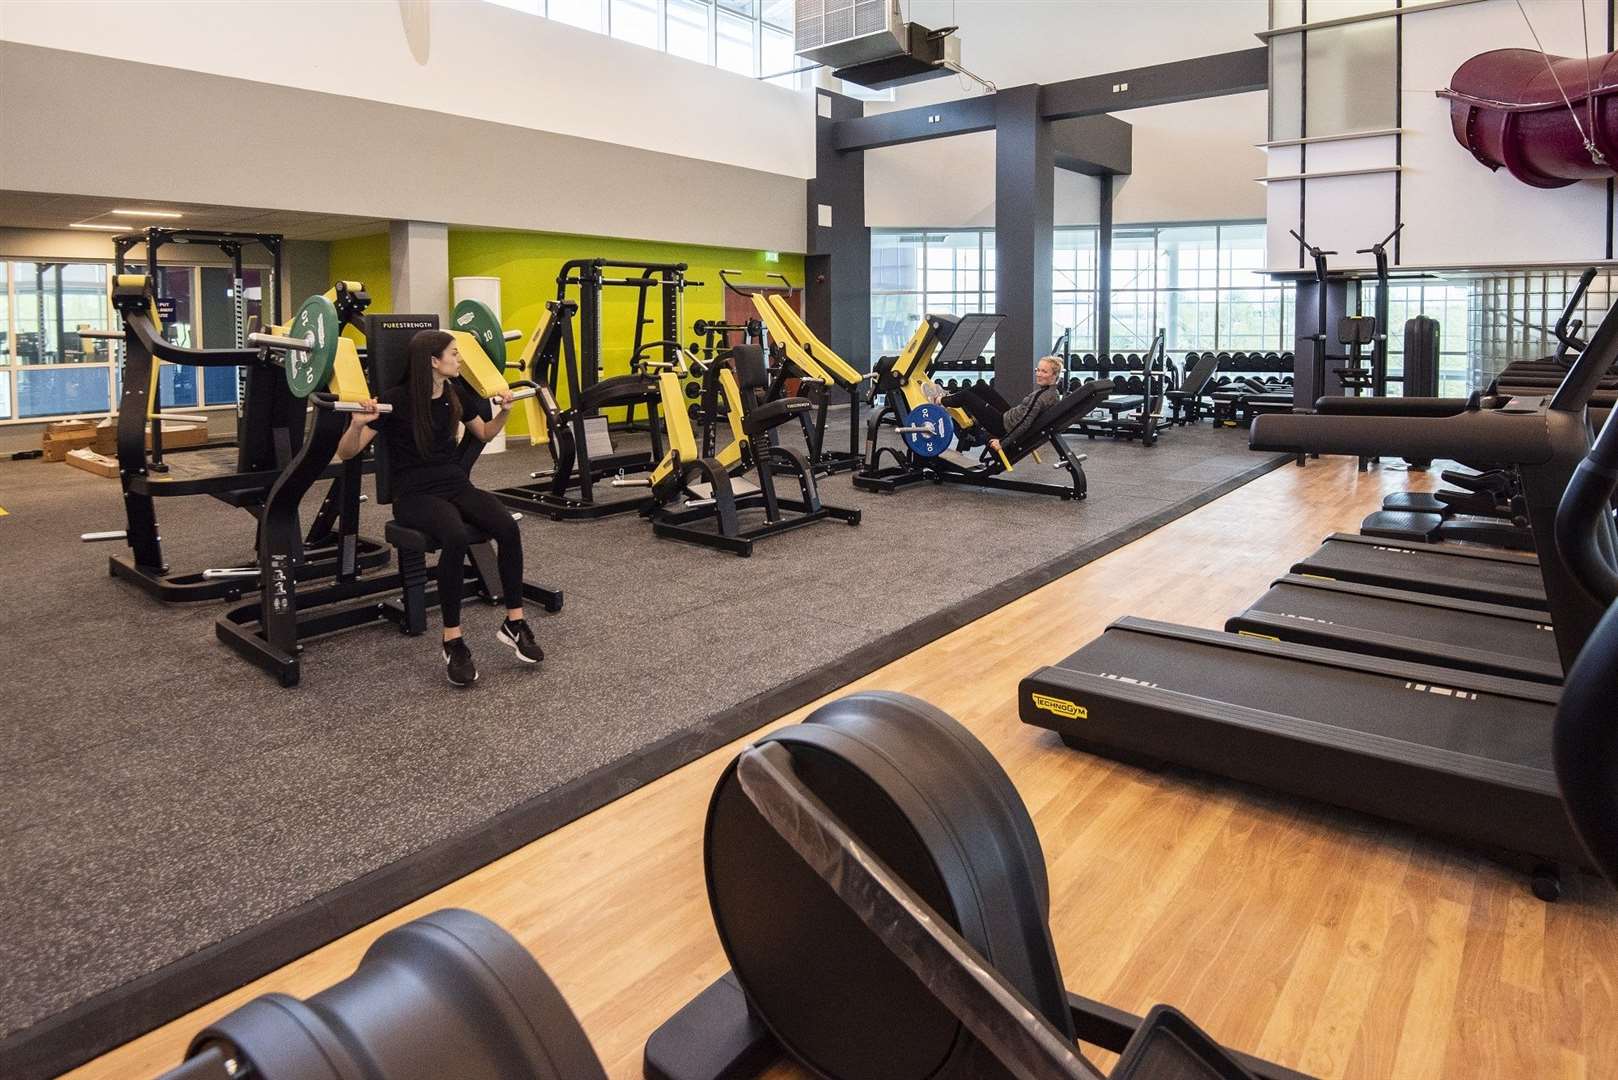 Even if you're not a gym fanatic, the extended exercise room is certainly something to marvel at